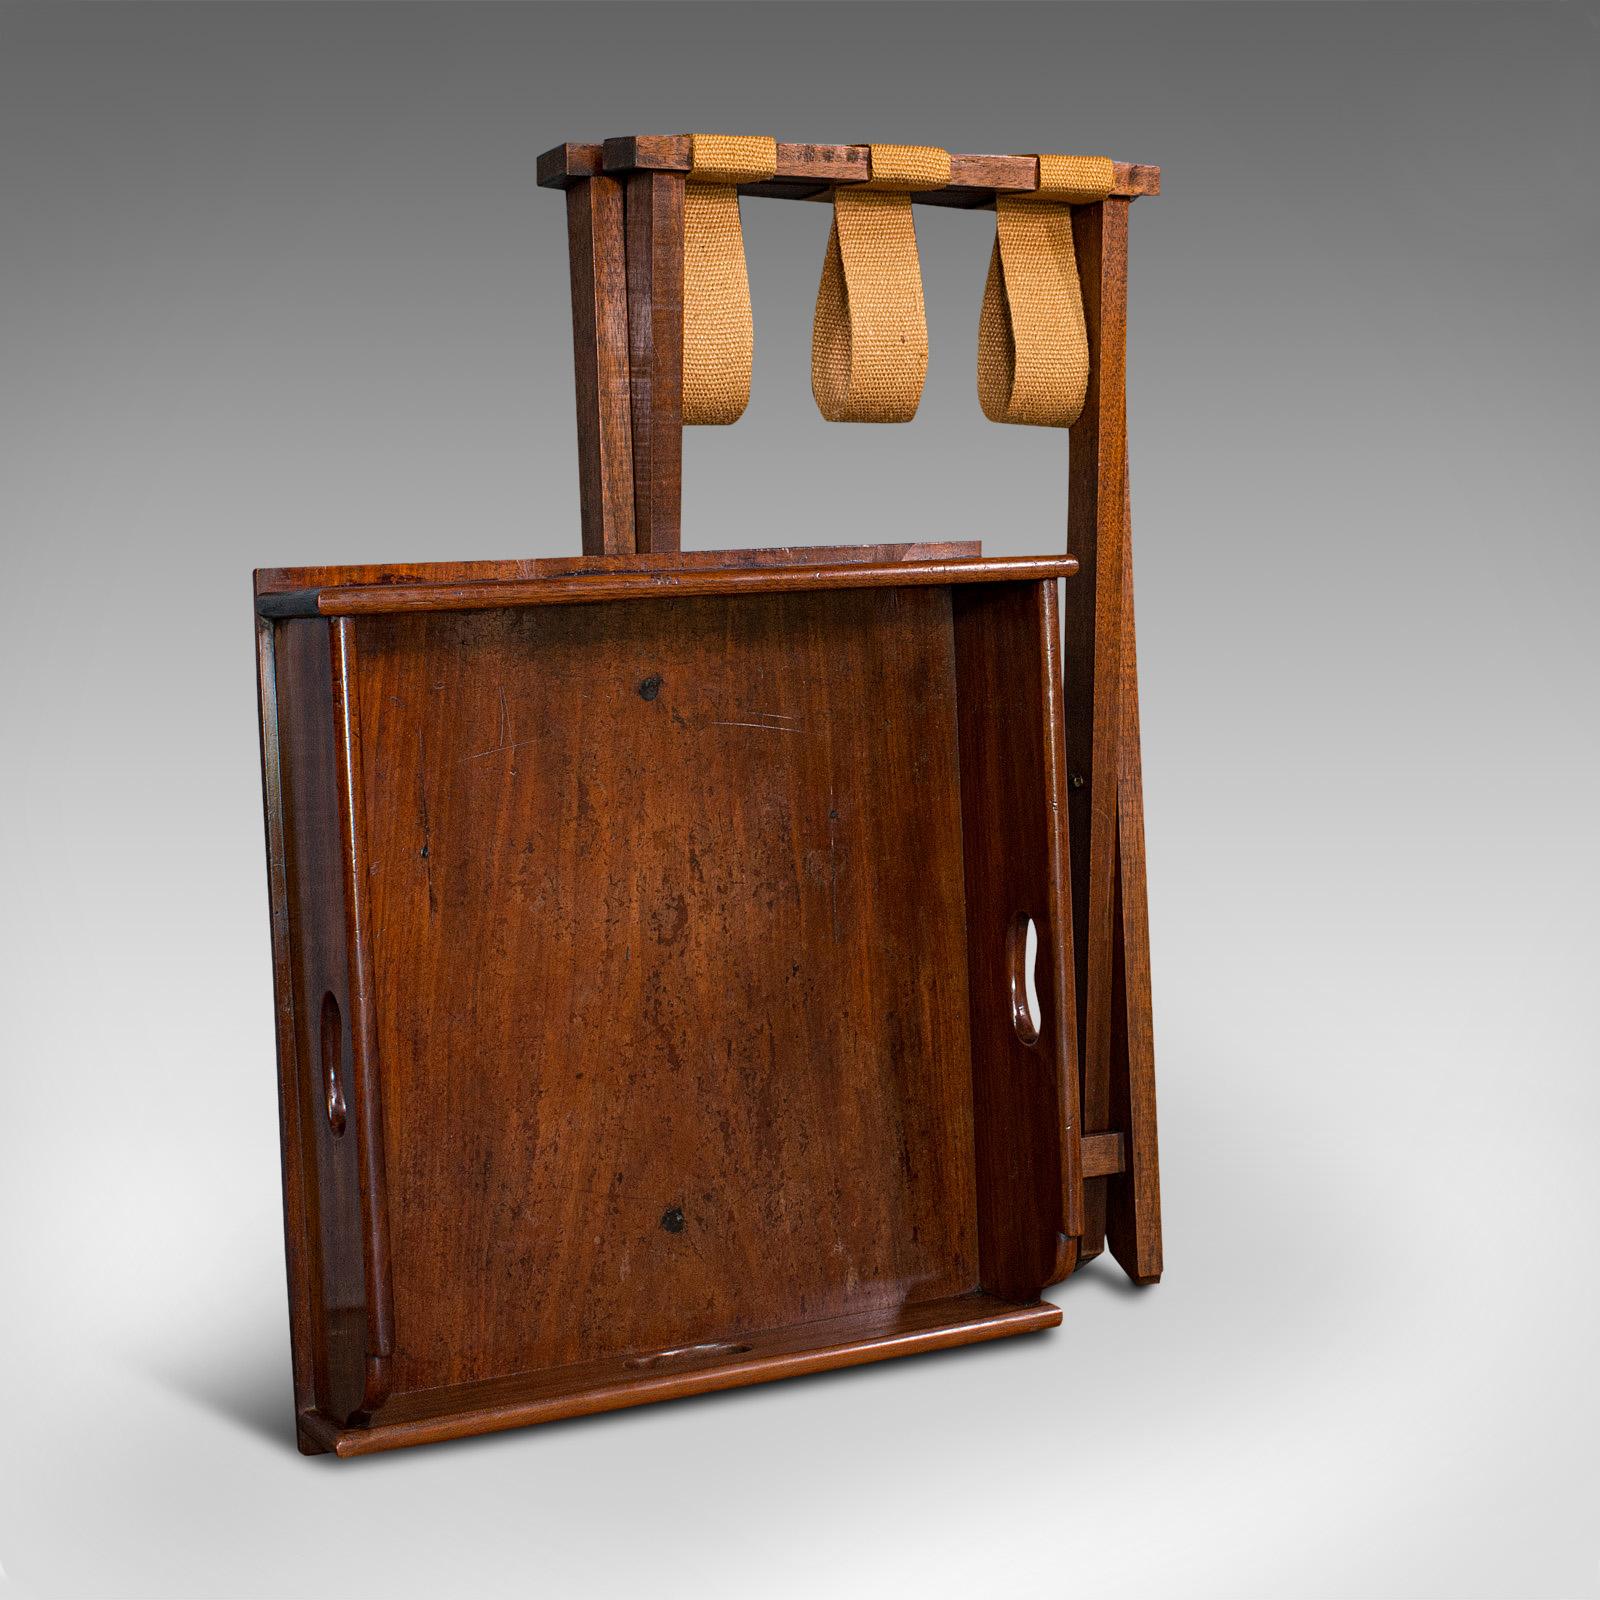 Antique Butler's Stand, English, Mahogany, Serving Tray, Rest, Victorian, C.1900 4